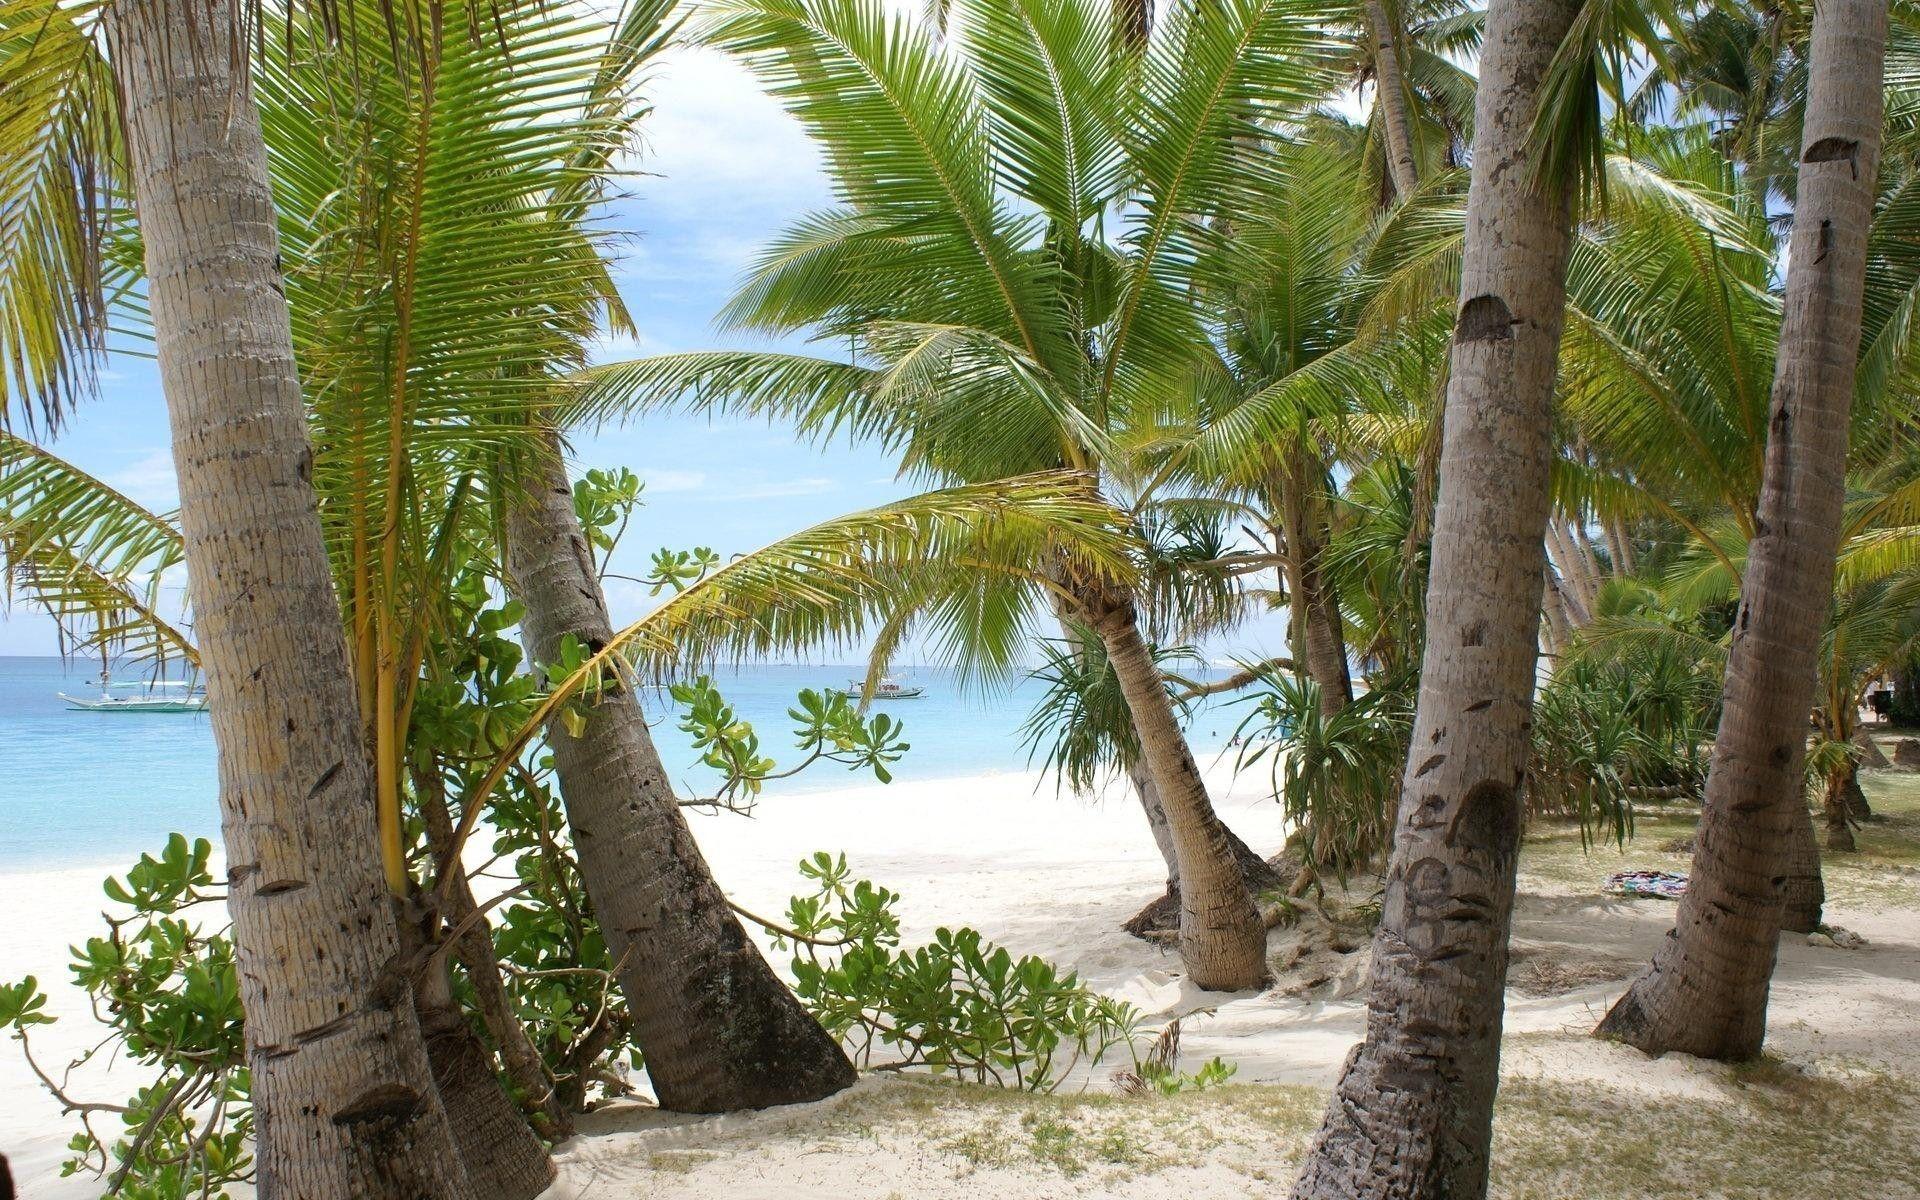 Best Coconut Trees at Beach Wallpaper